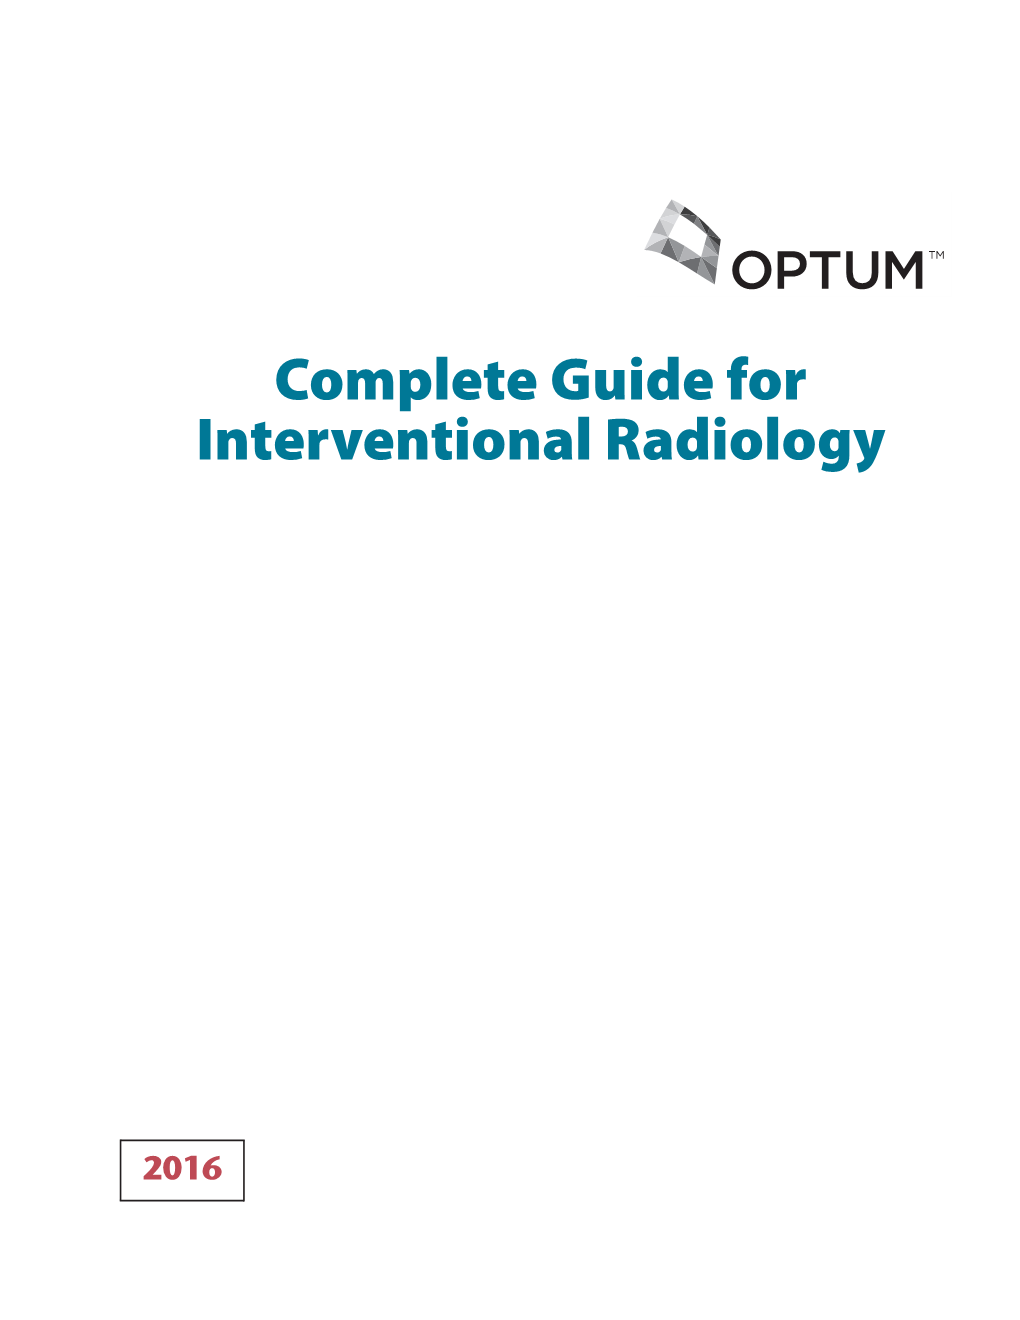 Complete Guide for Interventional Radiology